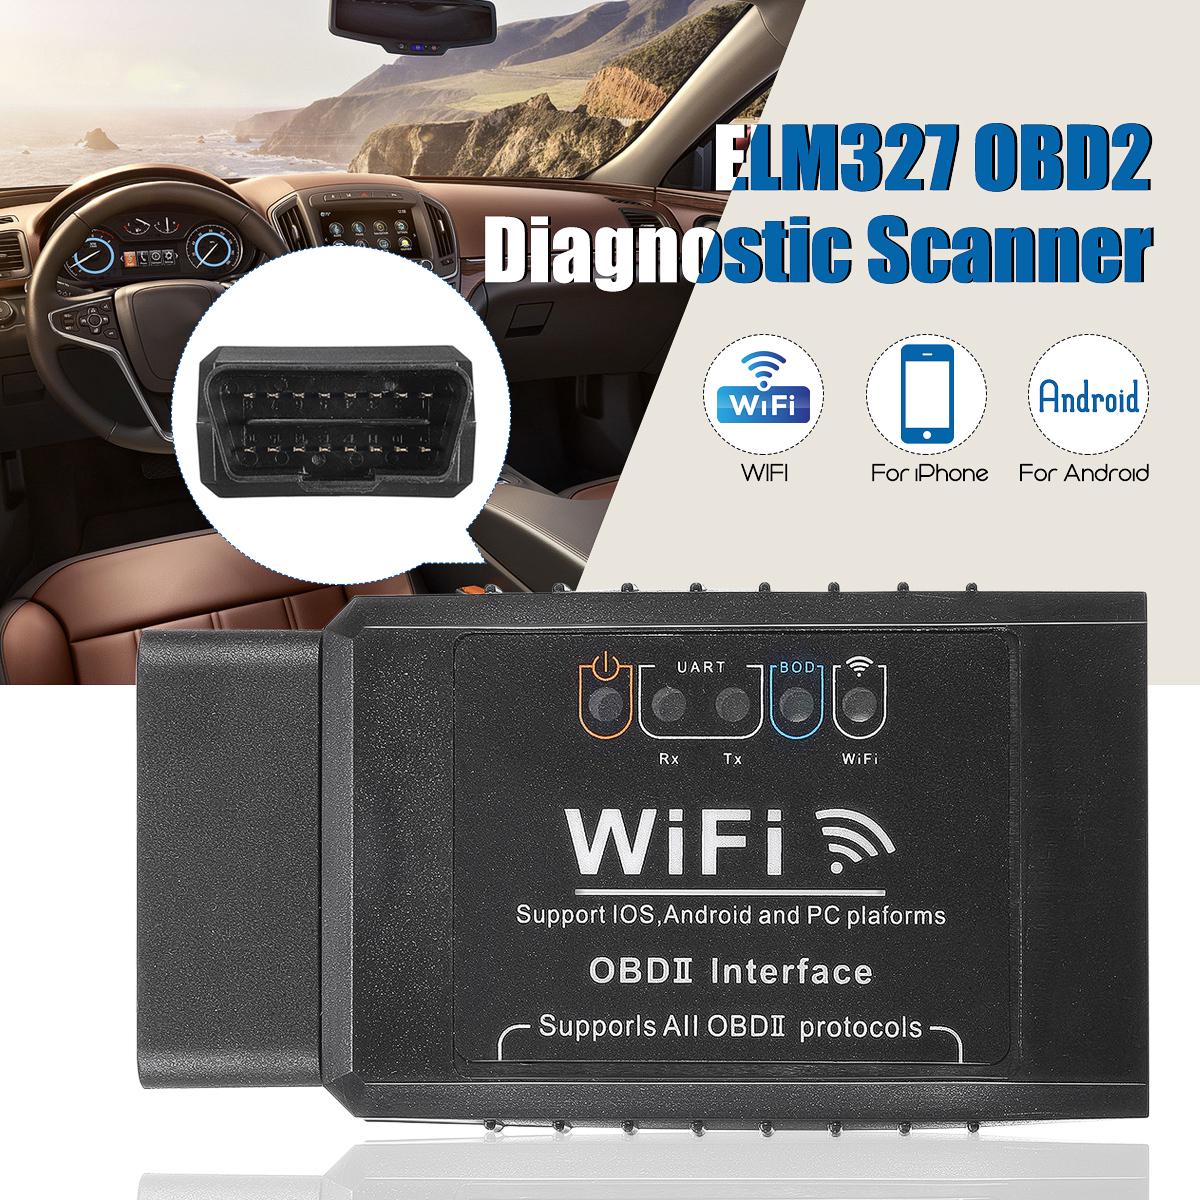 ELM327 WiFi OBD2 II Car Auto Diagnostic Tool Scanner Code Reader Interface Adapter For IOS Android